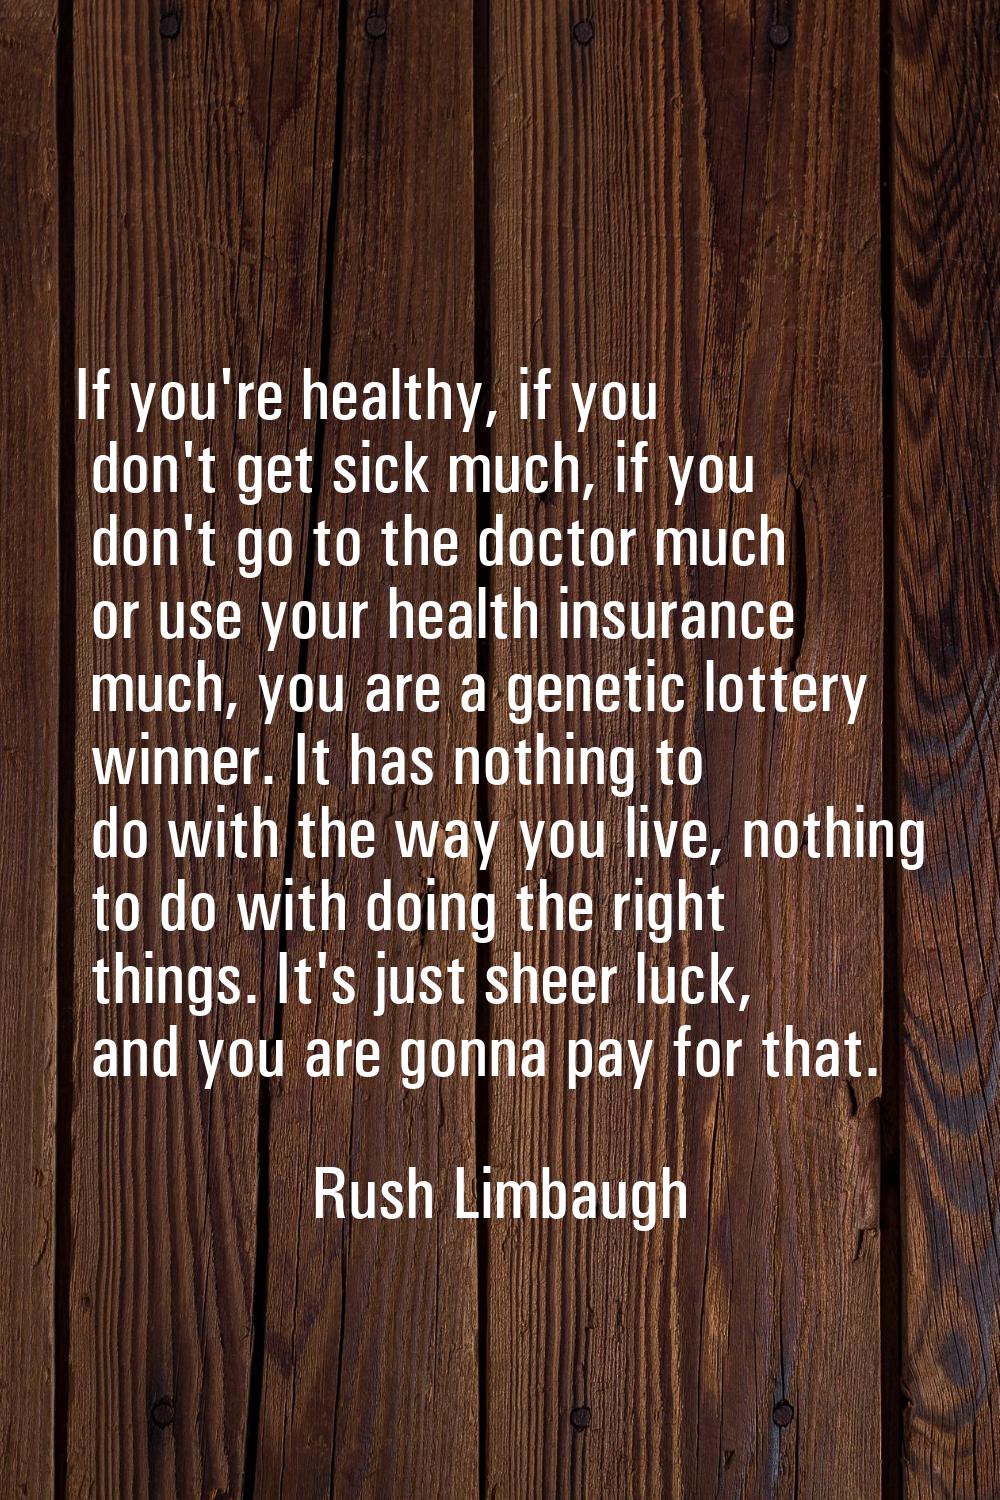 If you're healthy, if you don't get sick much, if you don't go to the doctor much or use your healt